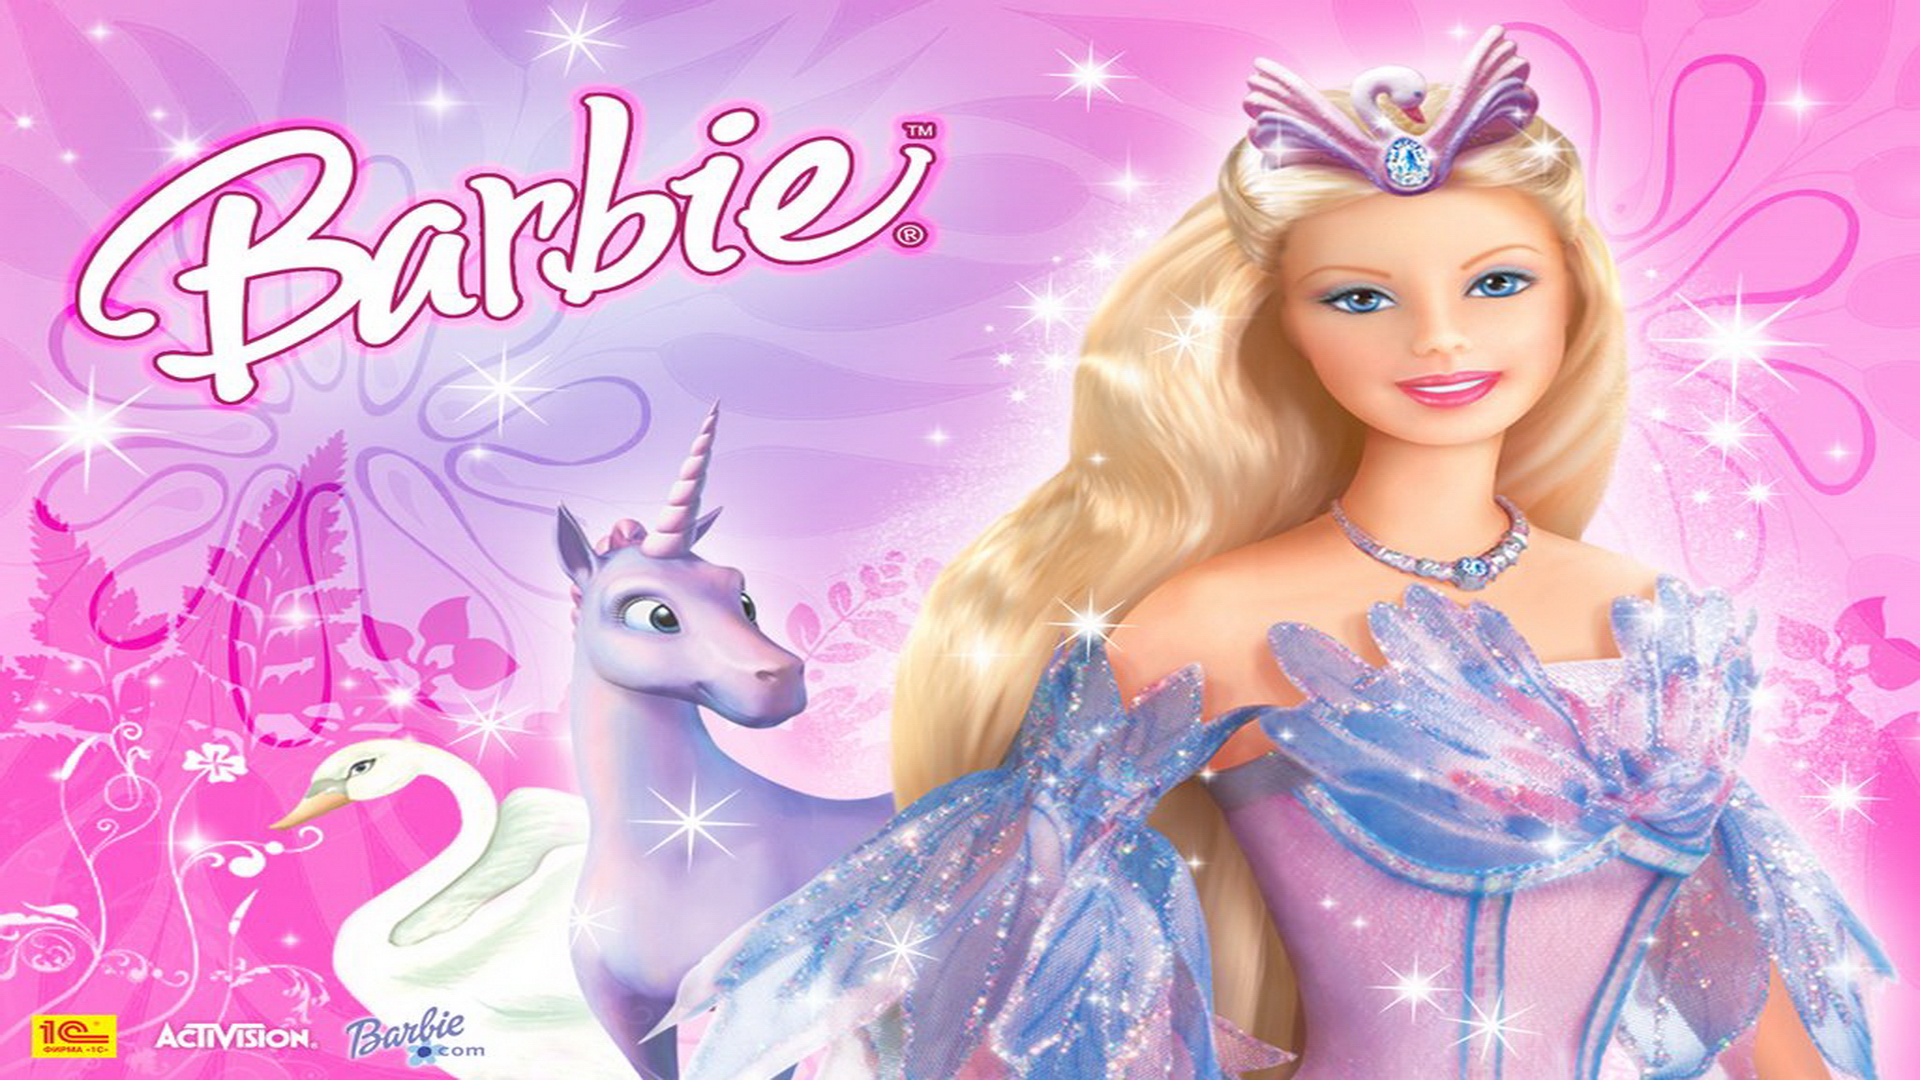 barbie girl wallpaper,doll,barbie,pink,toy,fictional character